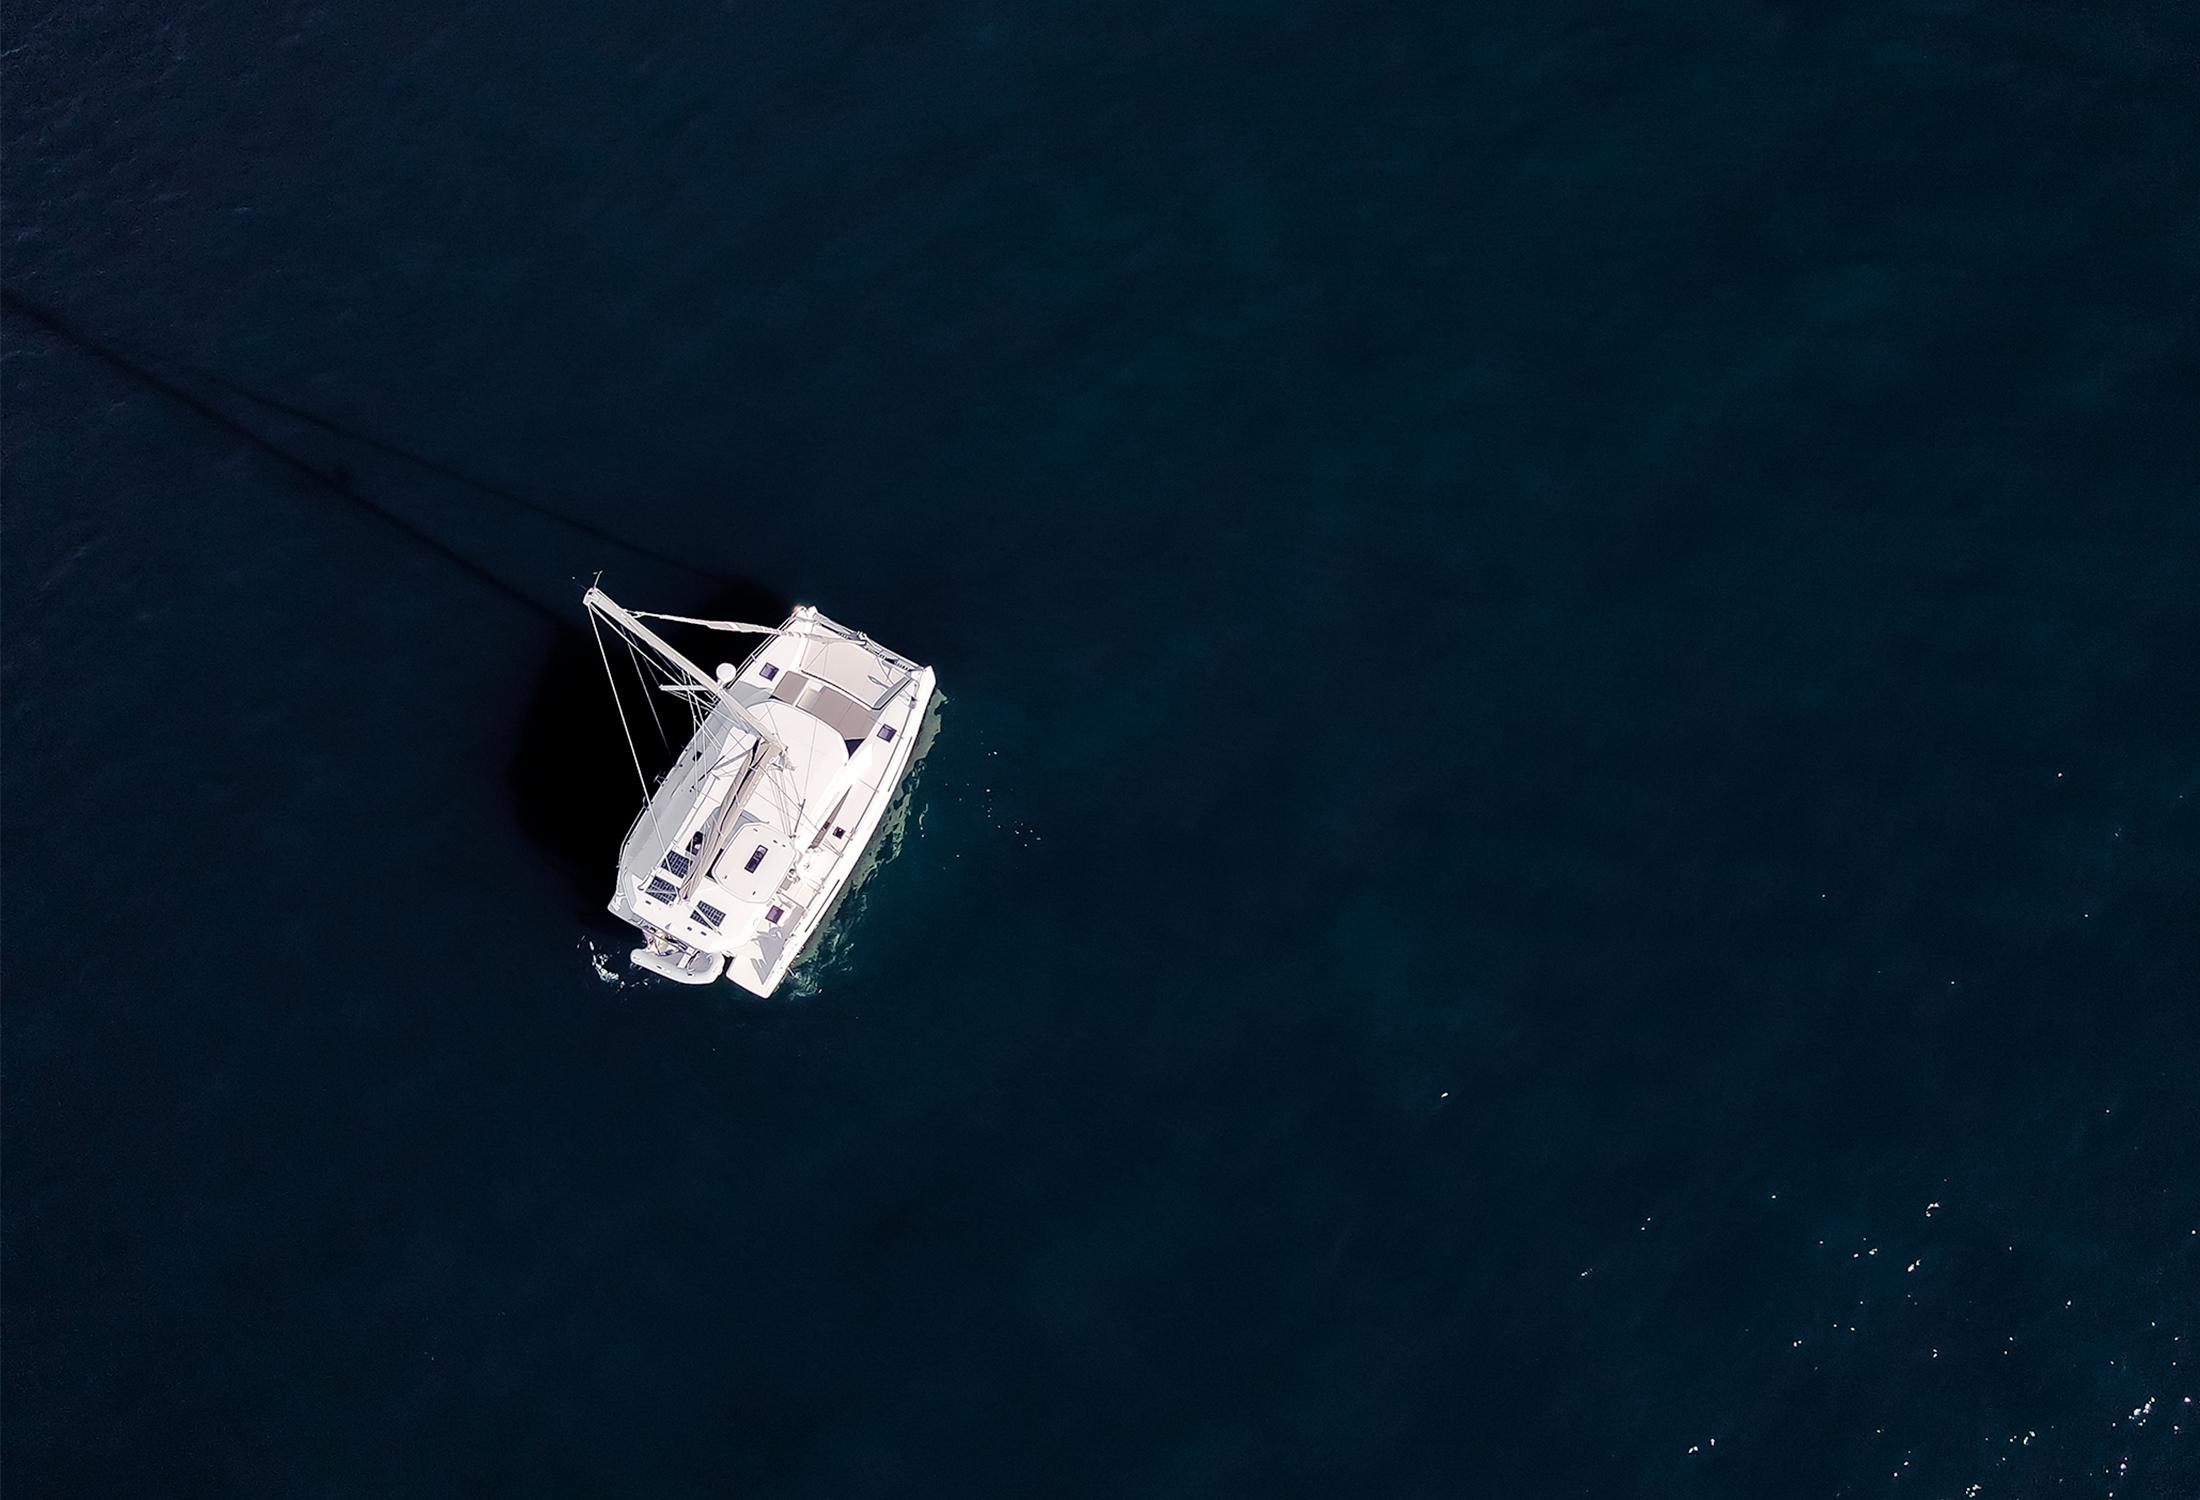 background image; a private catamaran under sail from above.